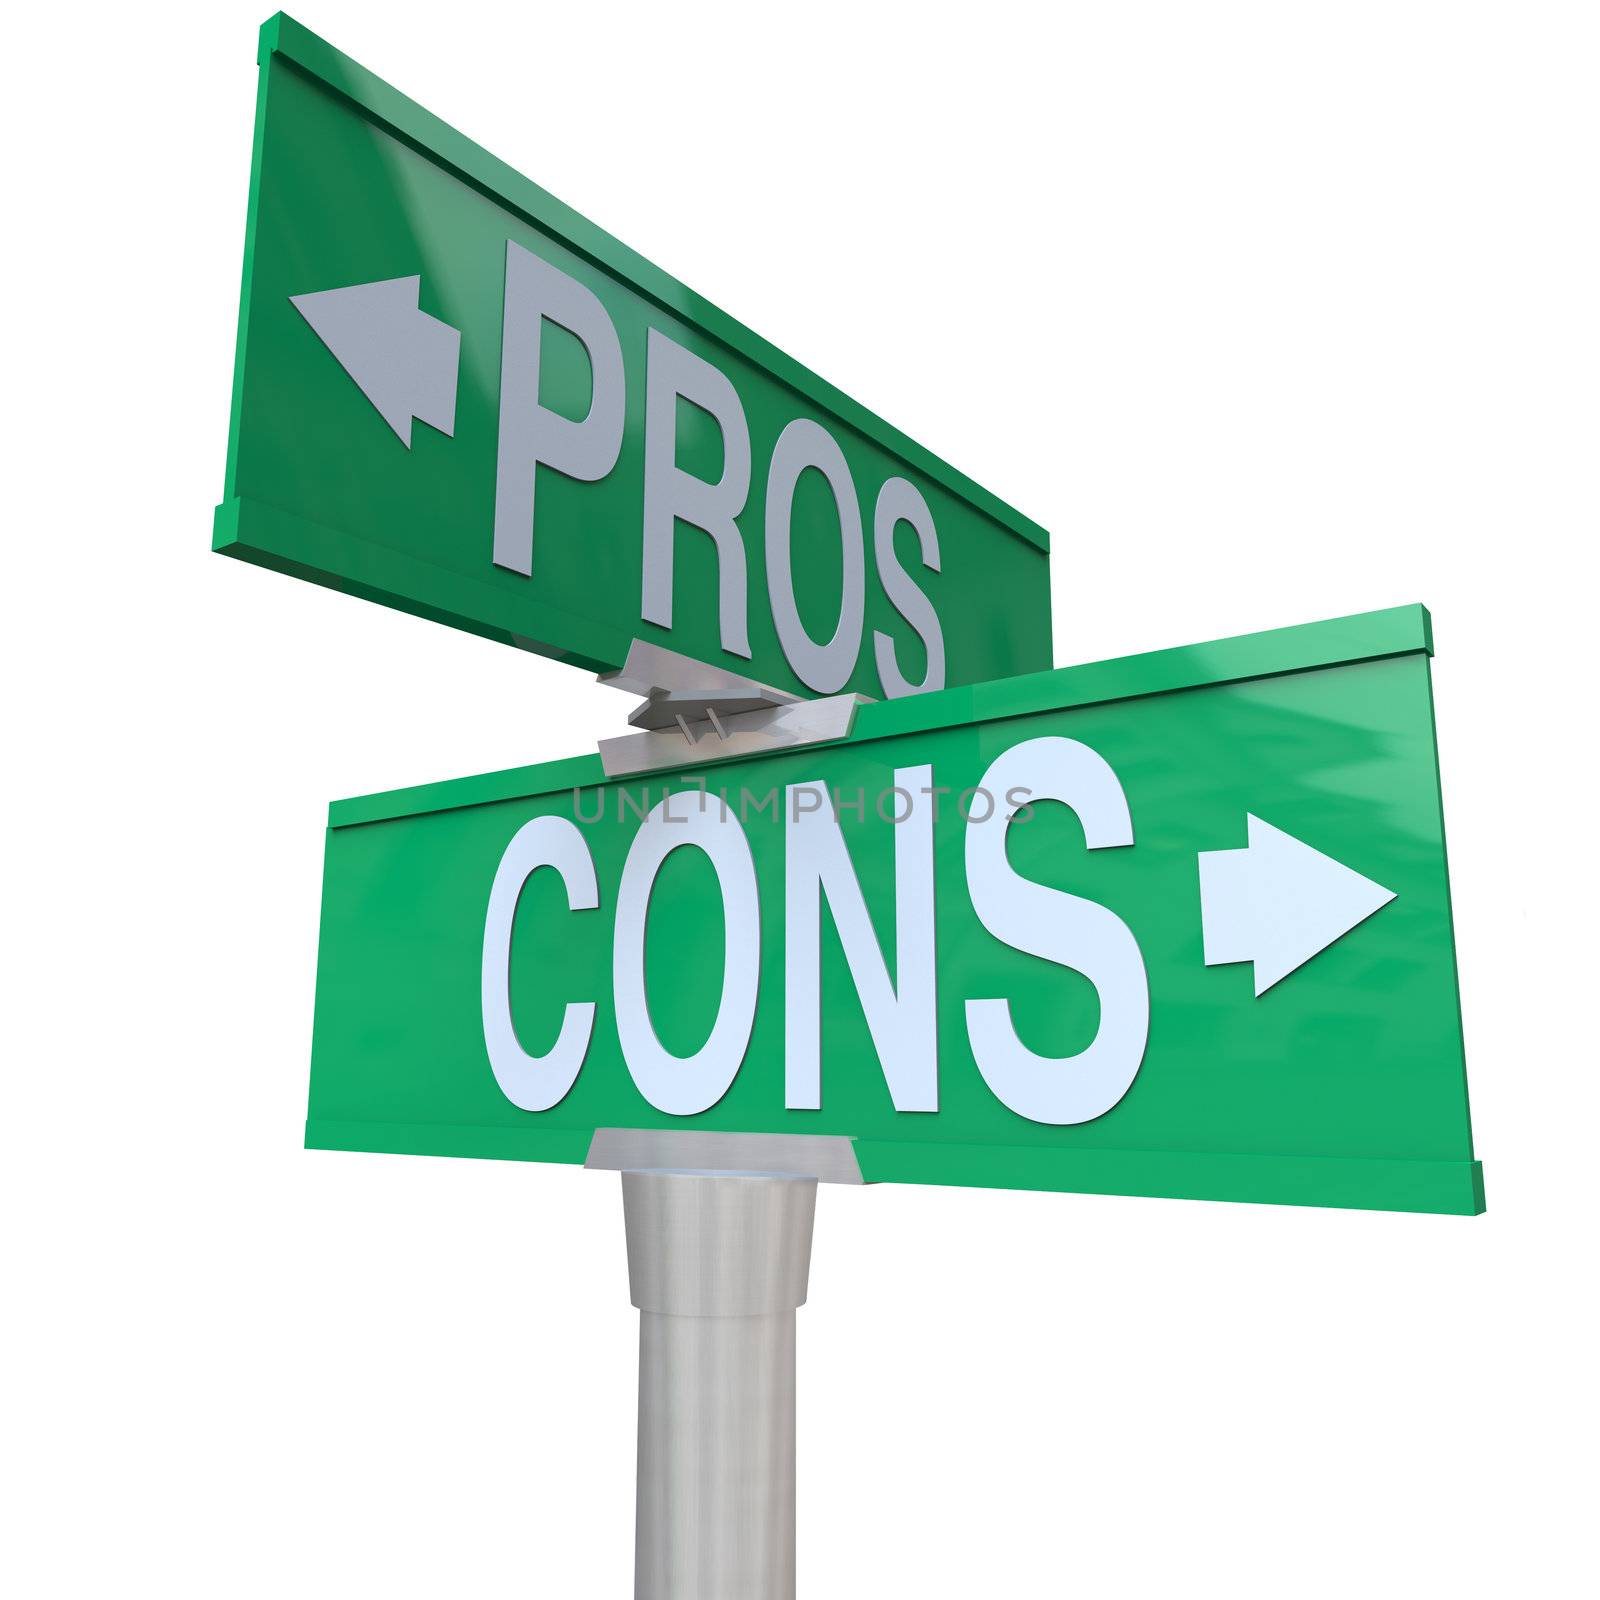 Pros and Cons Two-Way Street Signs Comparing Options by iQoncept